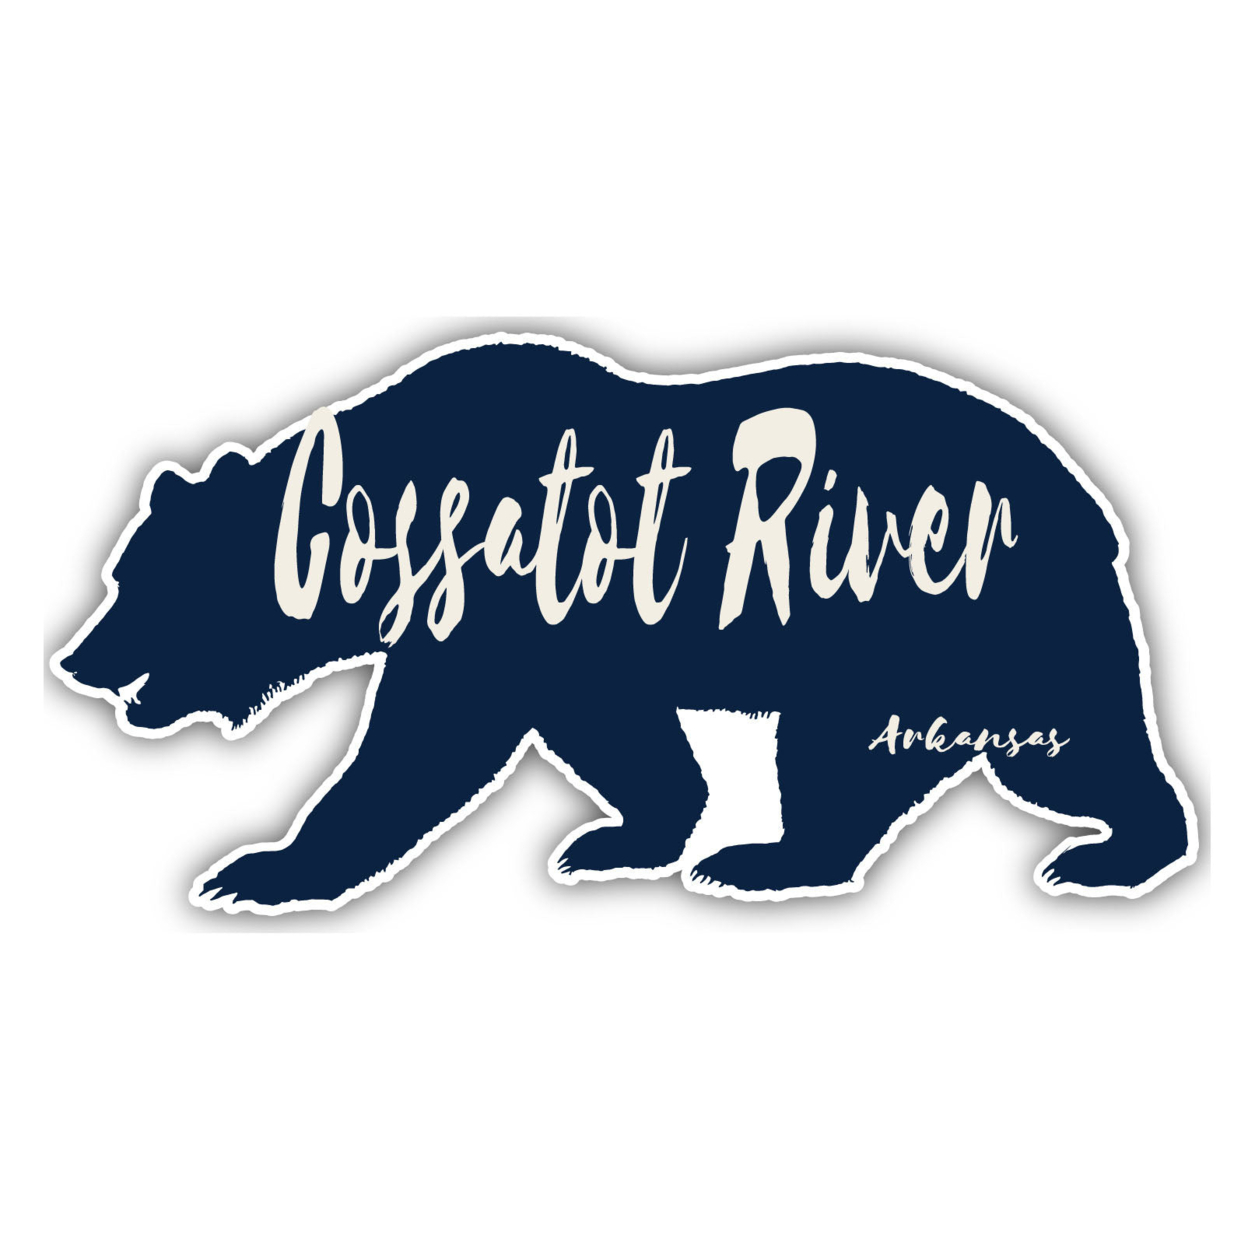 Cossatot River Arkansas Souvenir Decorative Stickers (Choose Theme And Size) - 4-Pack, 2-Inch, Great Outdoors